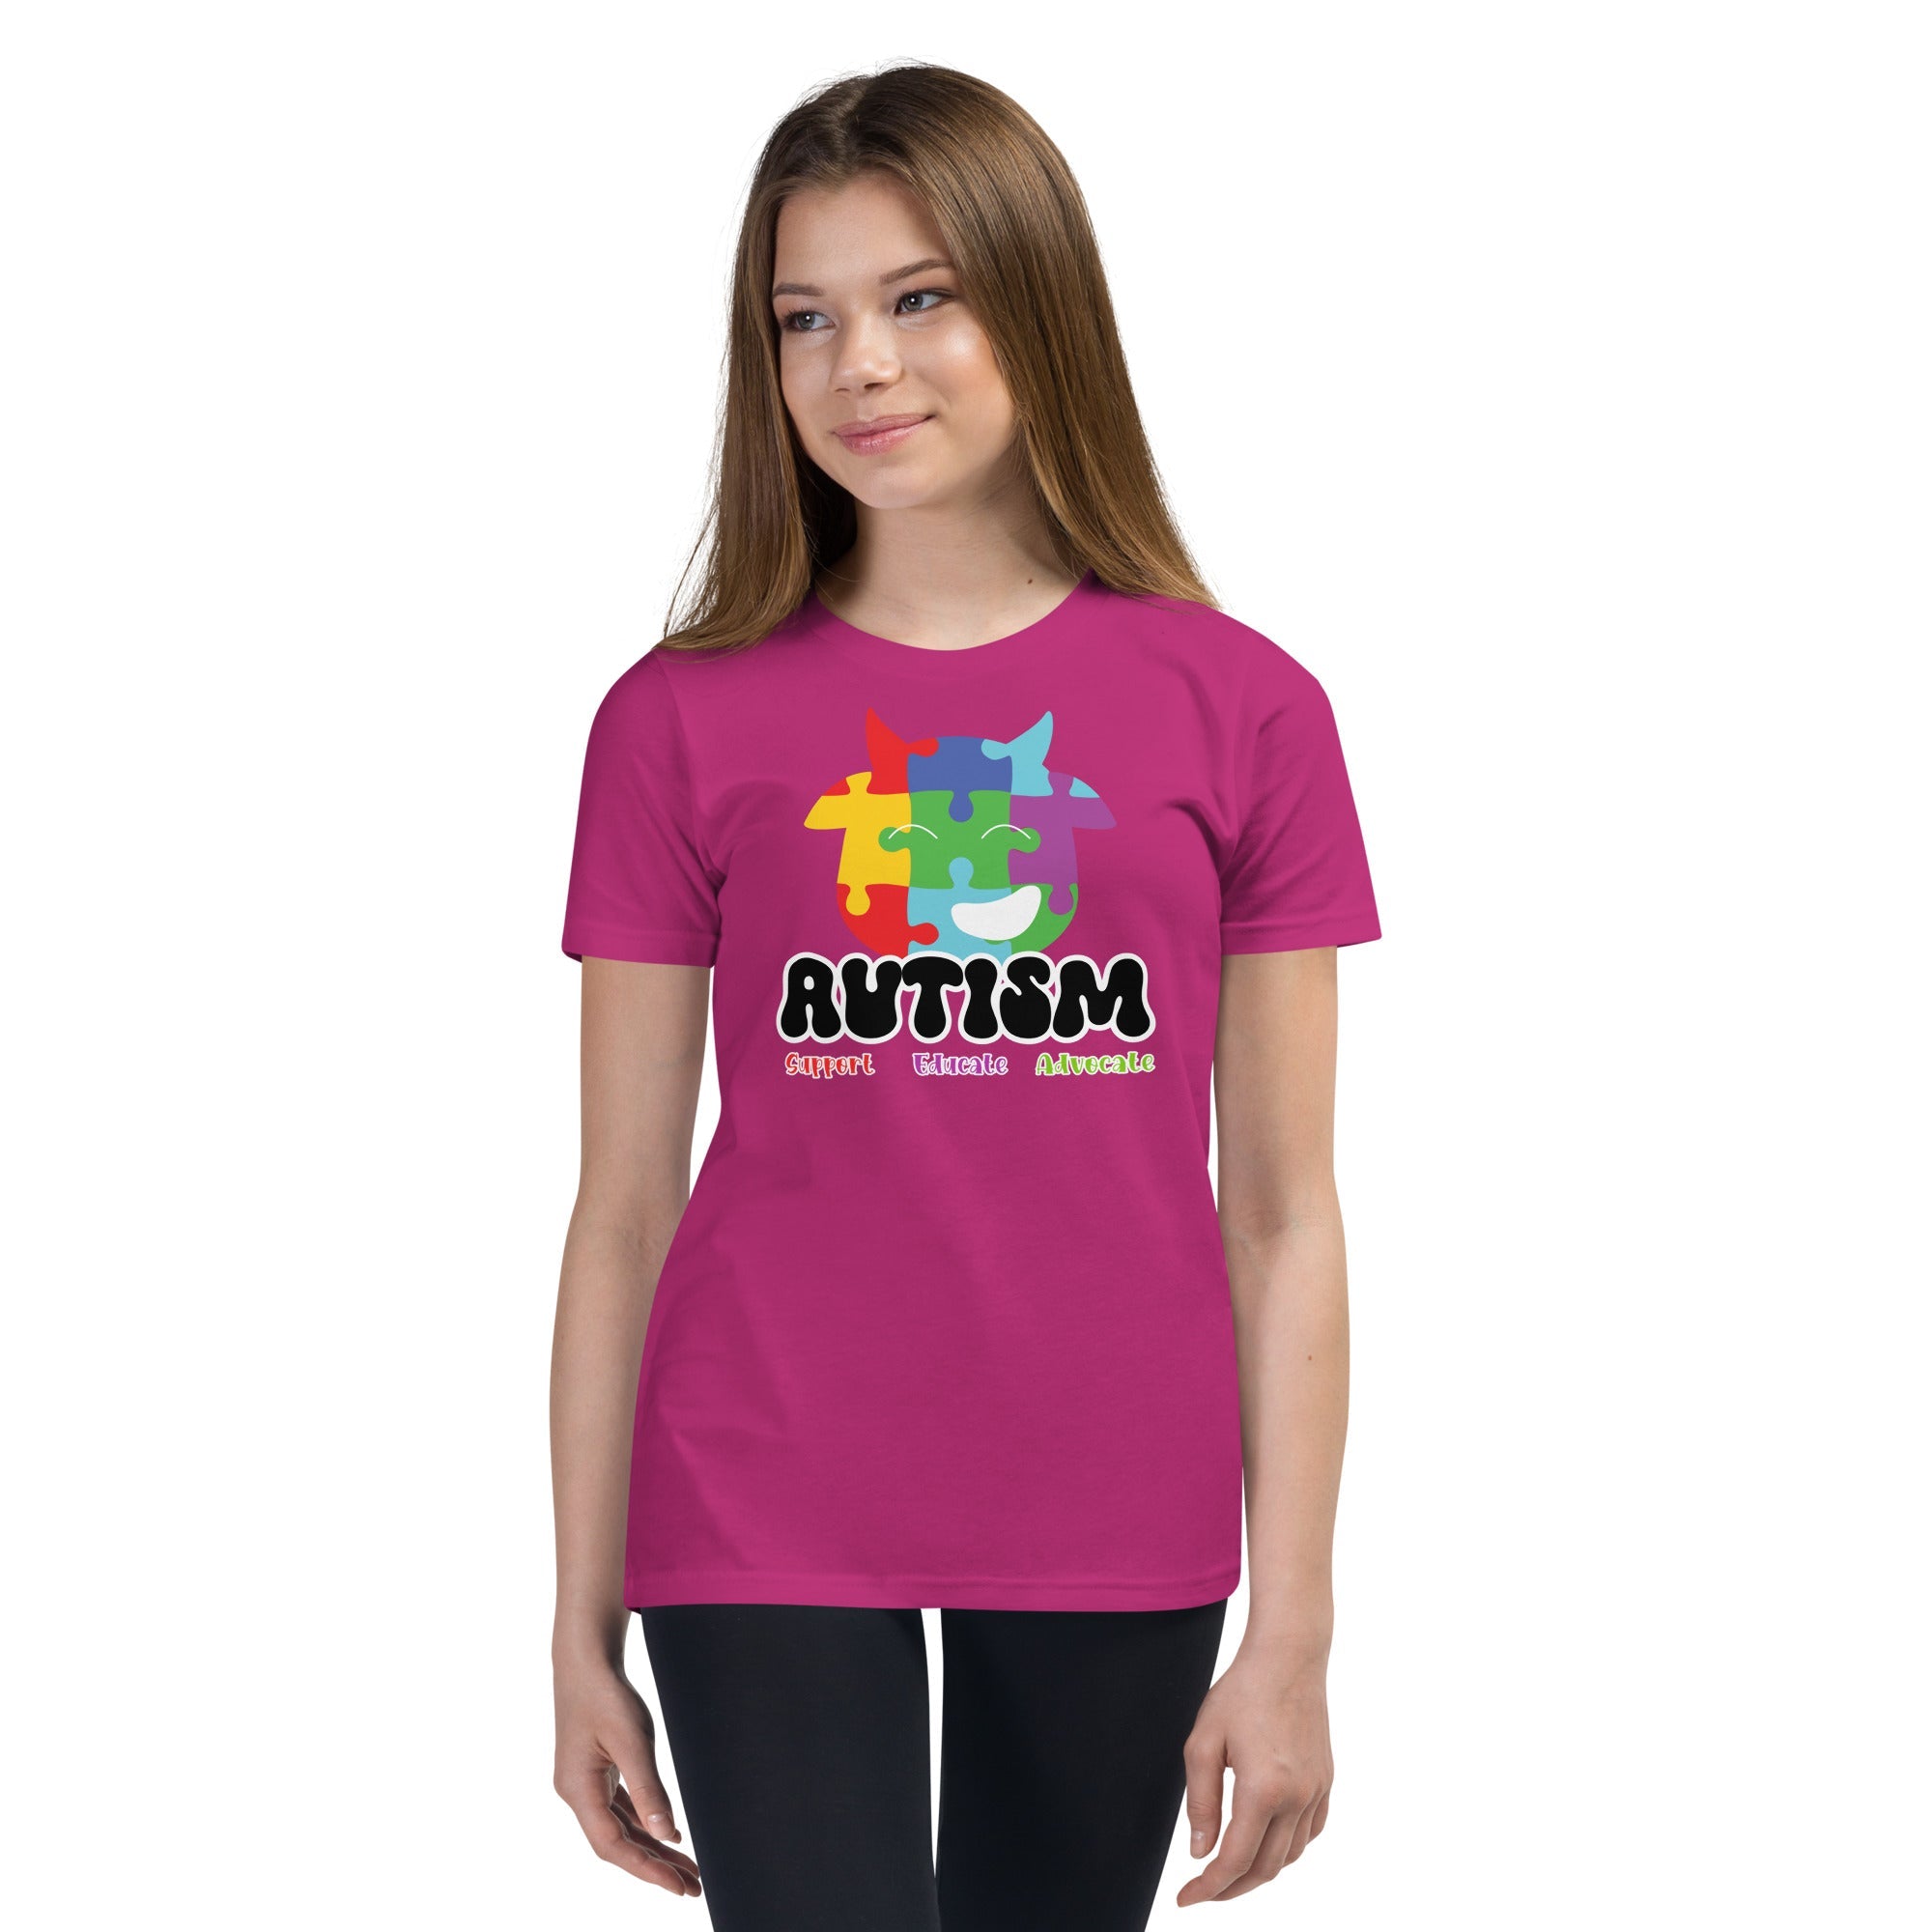 Autism Advocate Youth Graphic Tees - Kicks Shoelaces